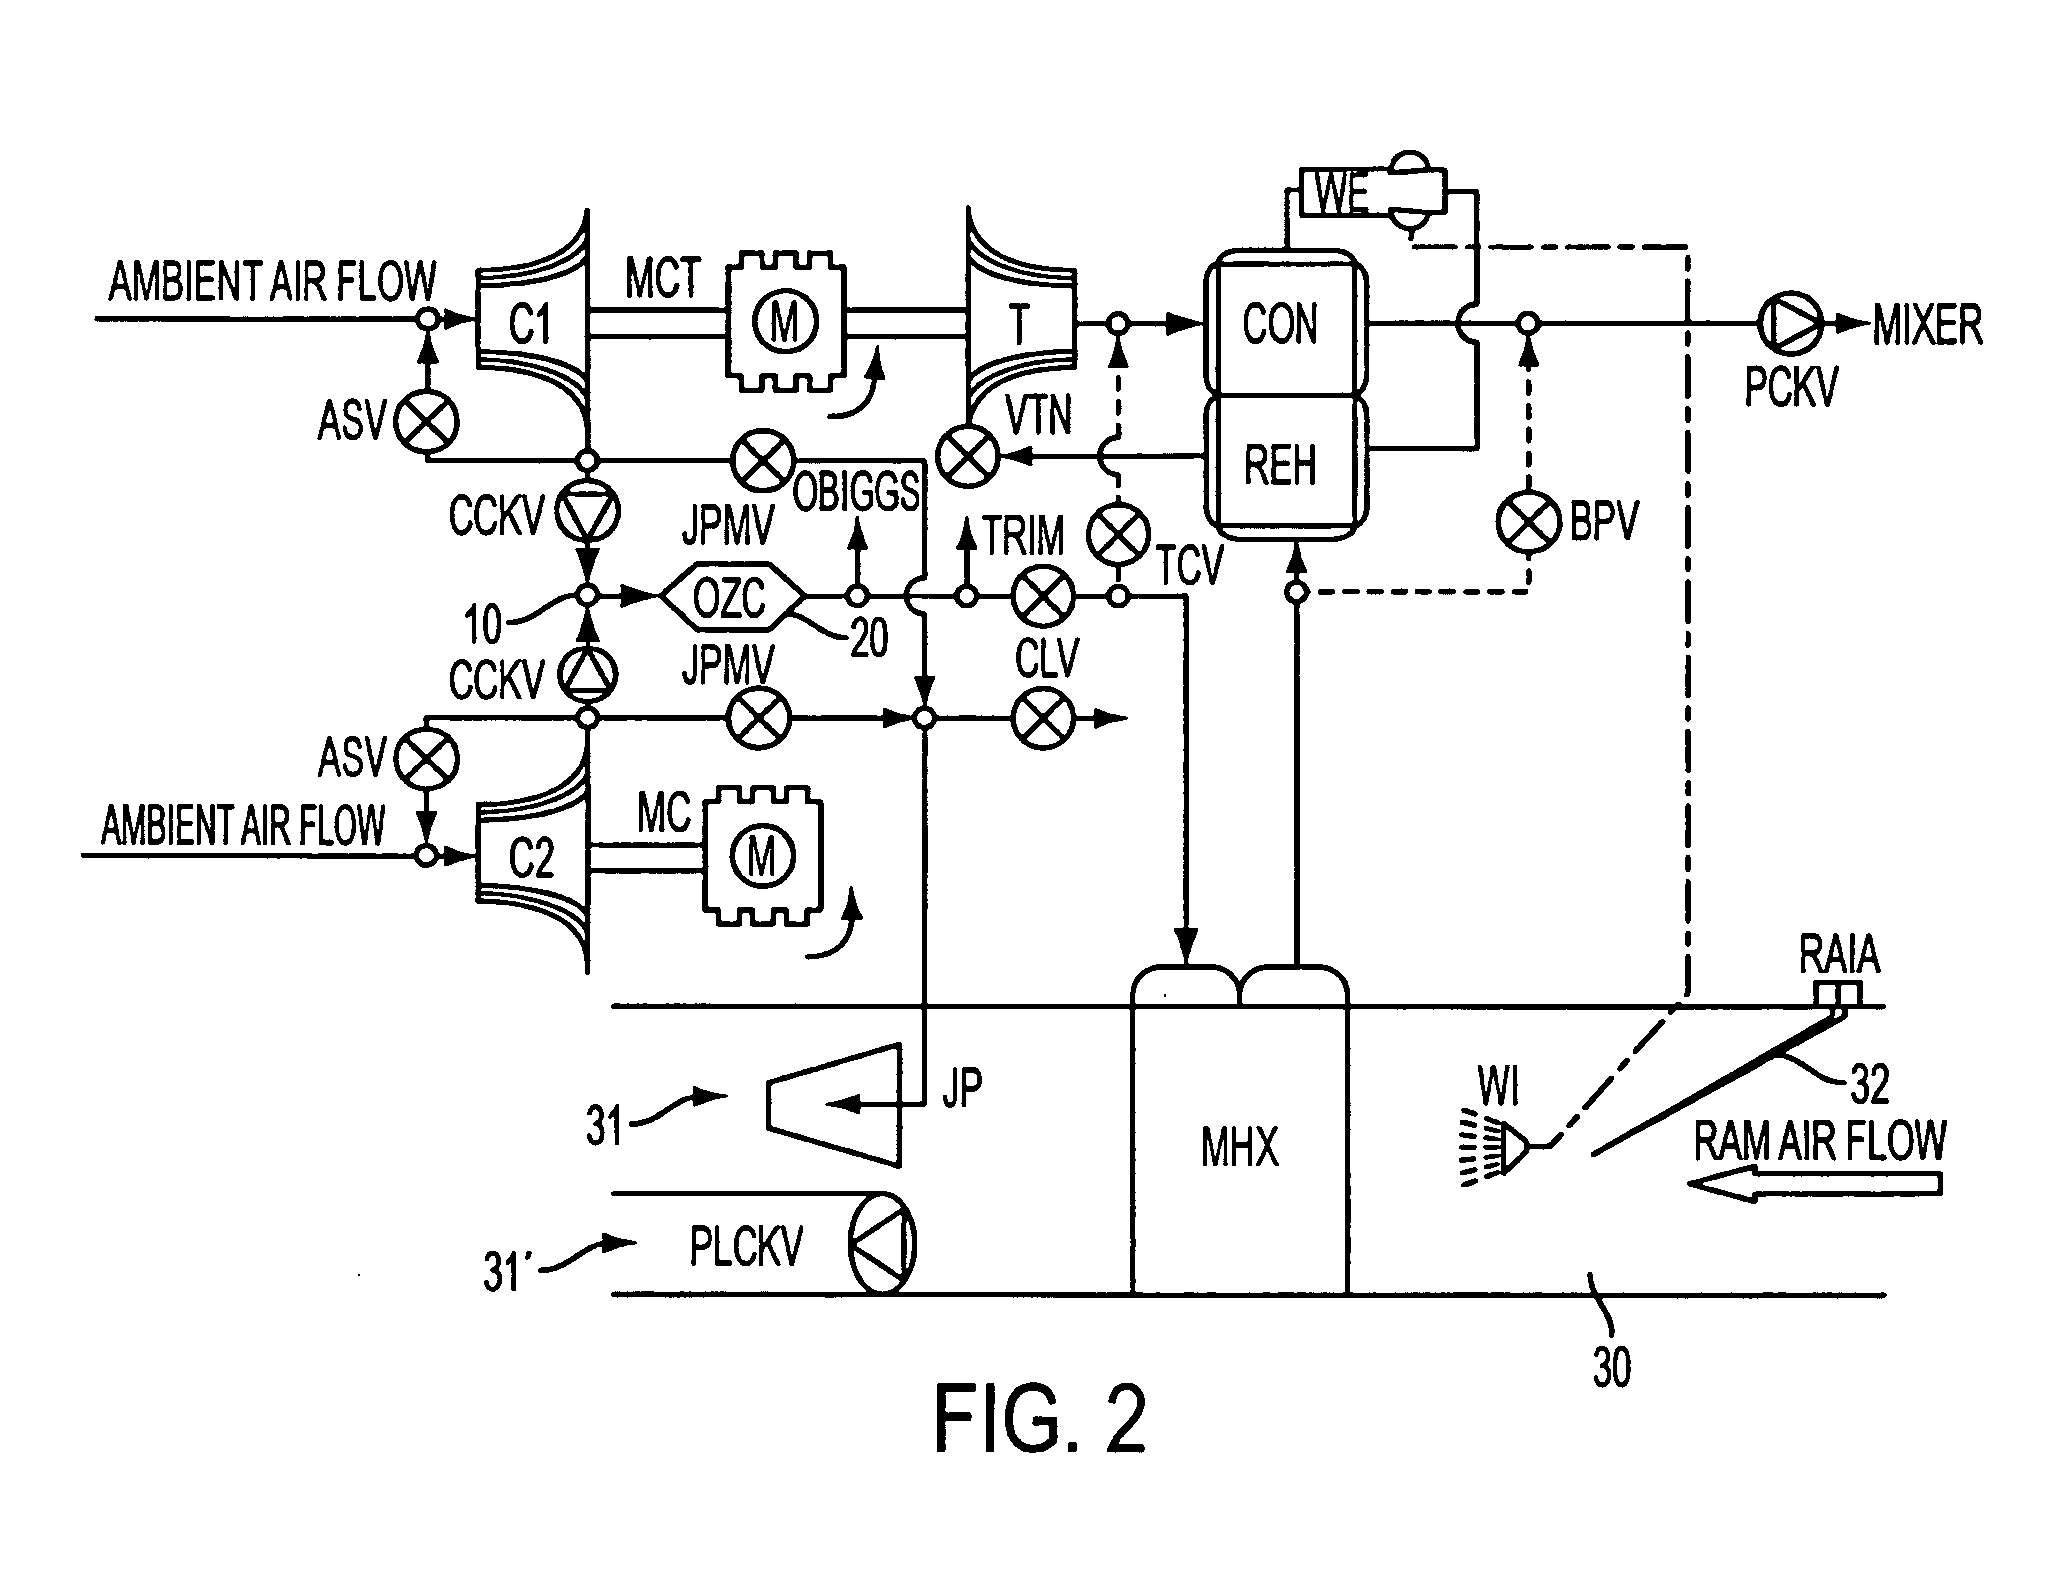 Method of operating an aircraft system